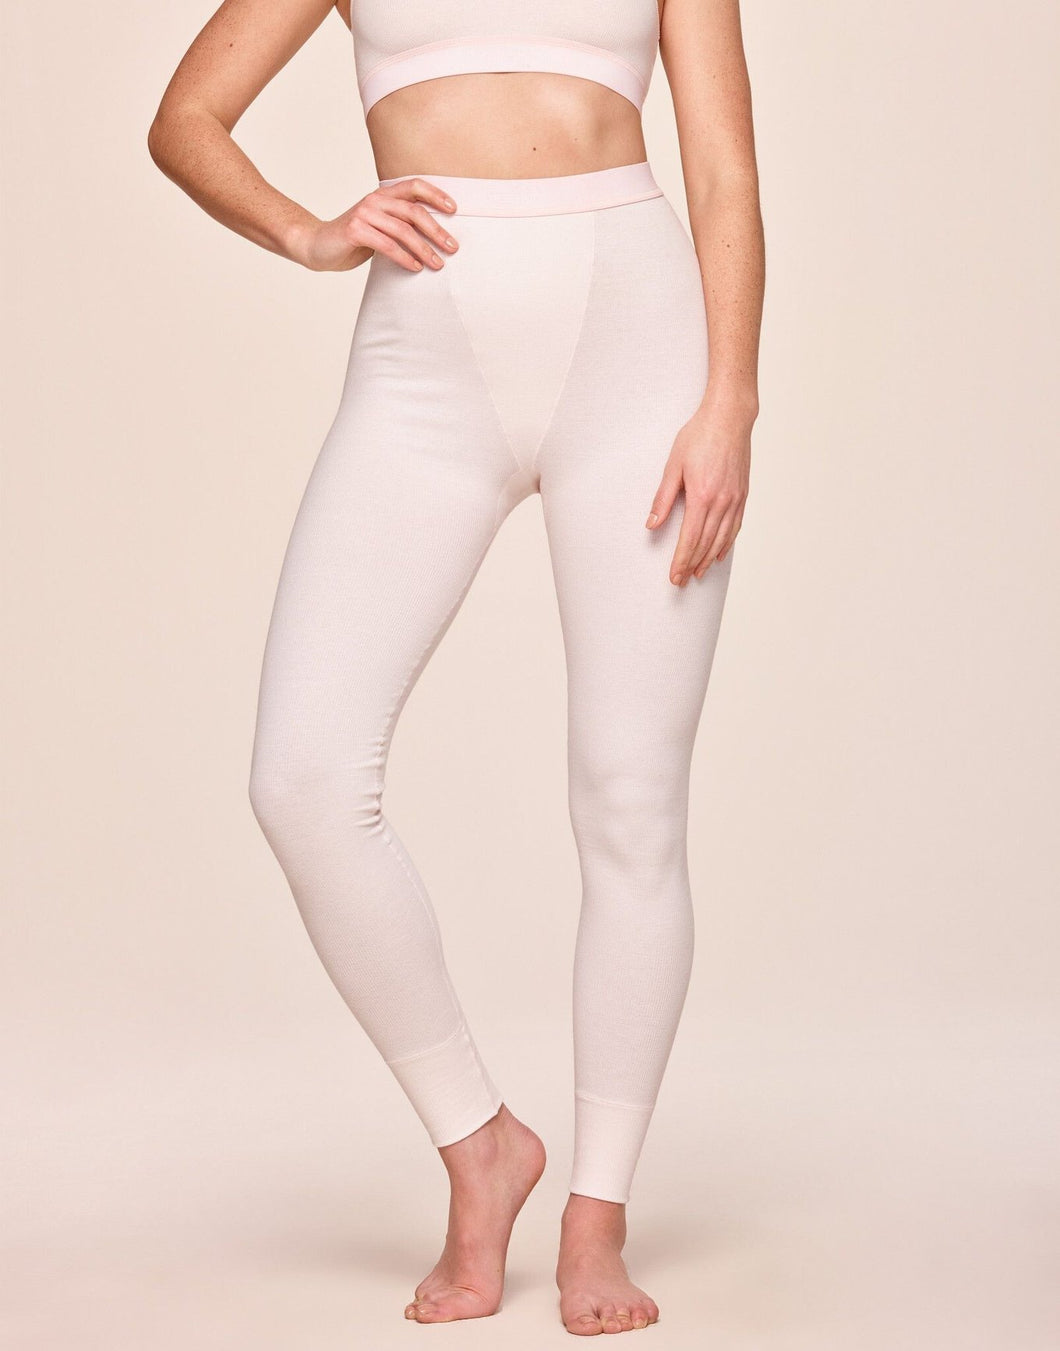 nueskin Laurie Rib Cotton Legging in color Powder Puff and shape legging